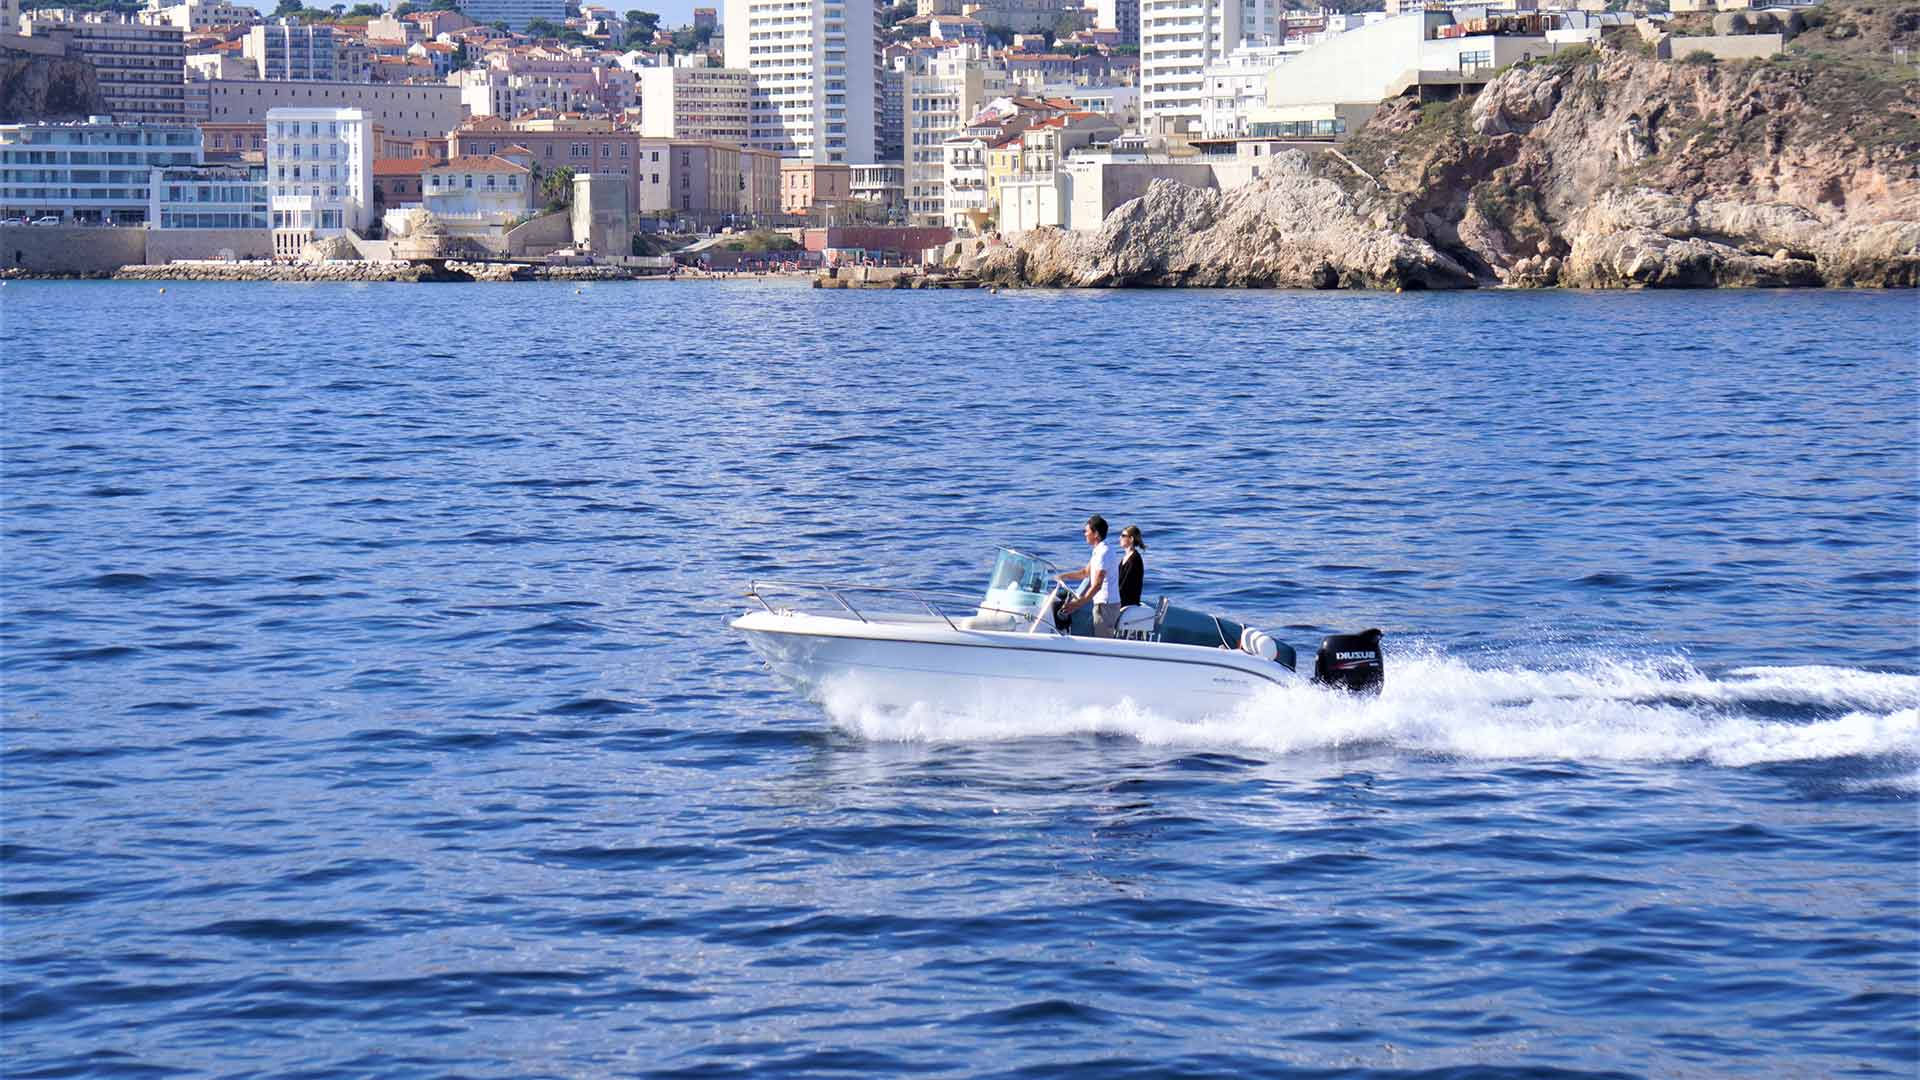 Couple riding a speed boat